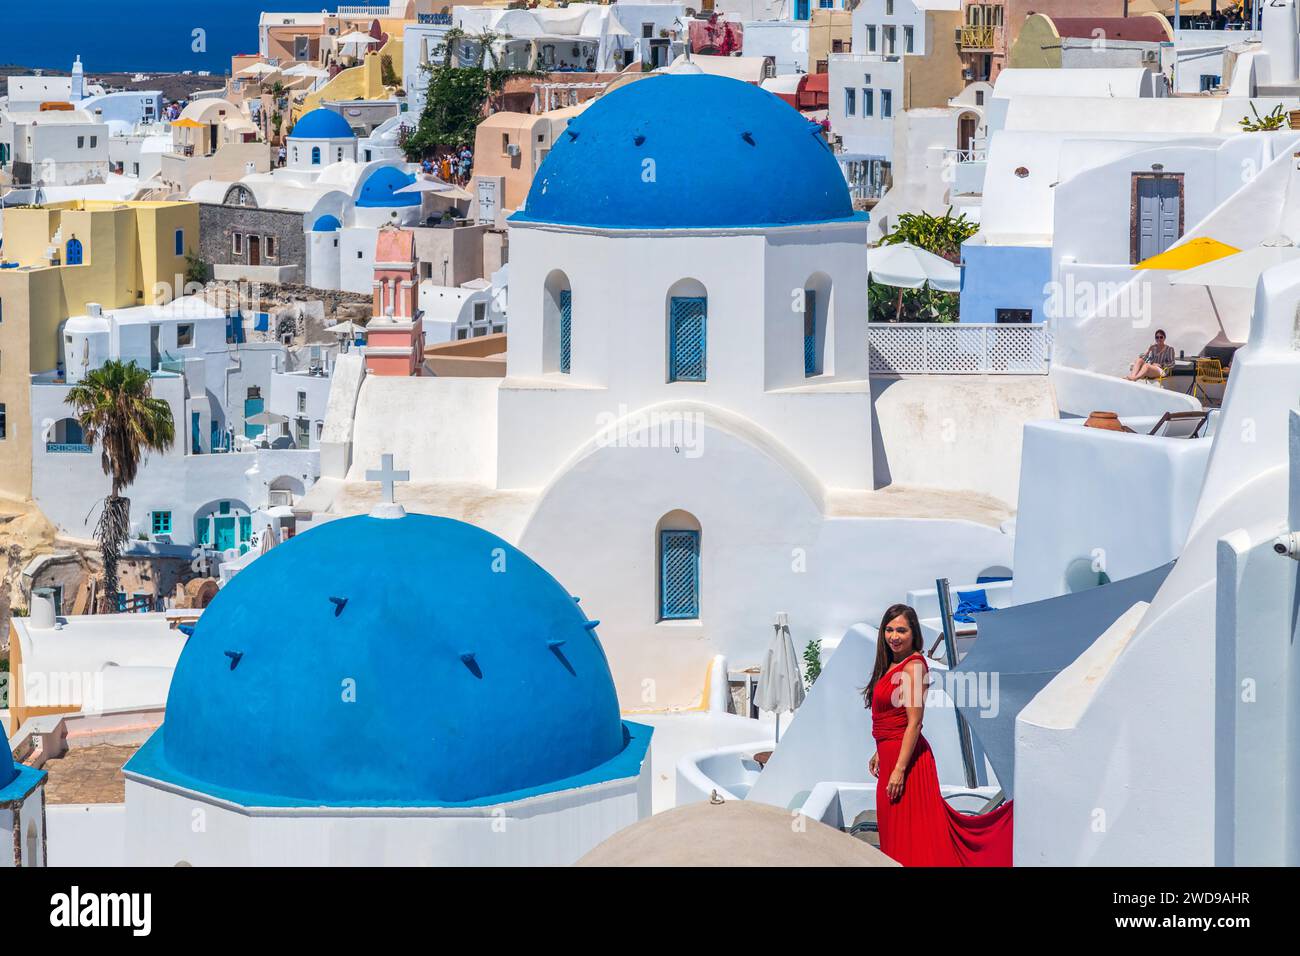 Oia, Santorini island, Greece - June 21, 2021: Beautiful girl in red dress and typical white-blue traditional architecture with domes and churches. Stock Photo